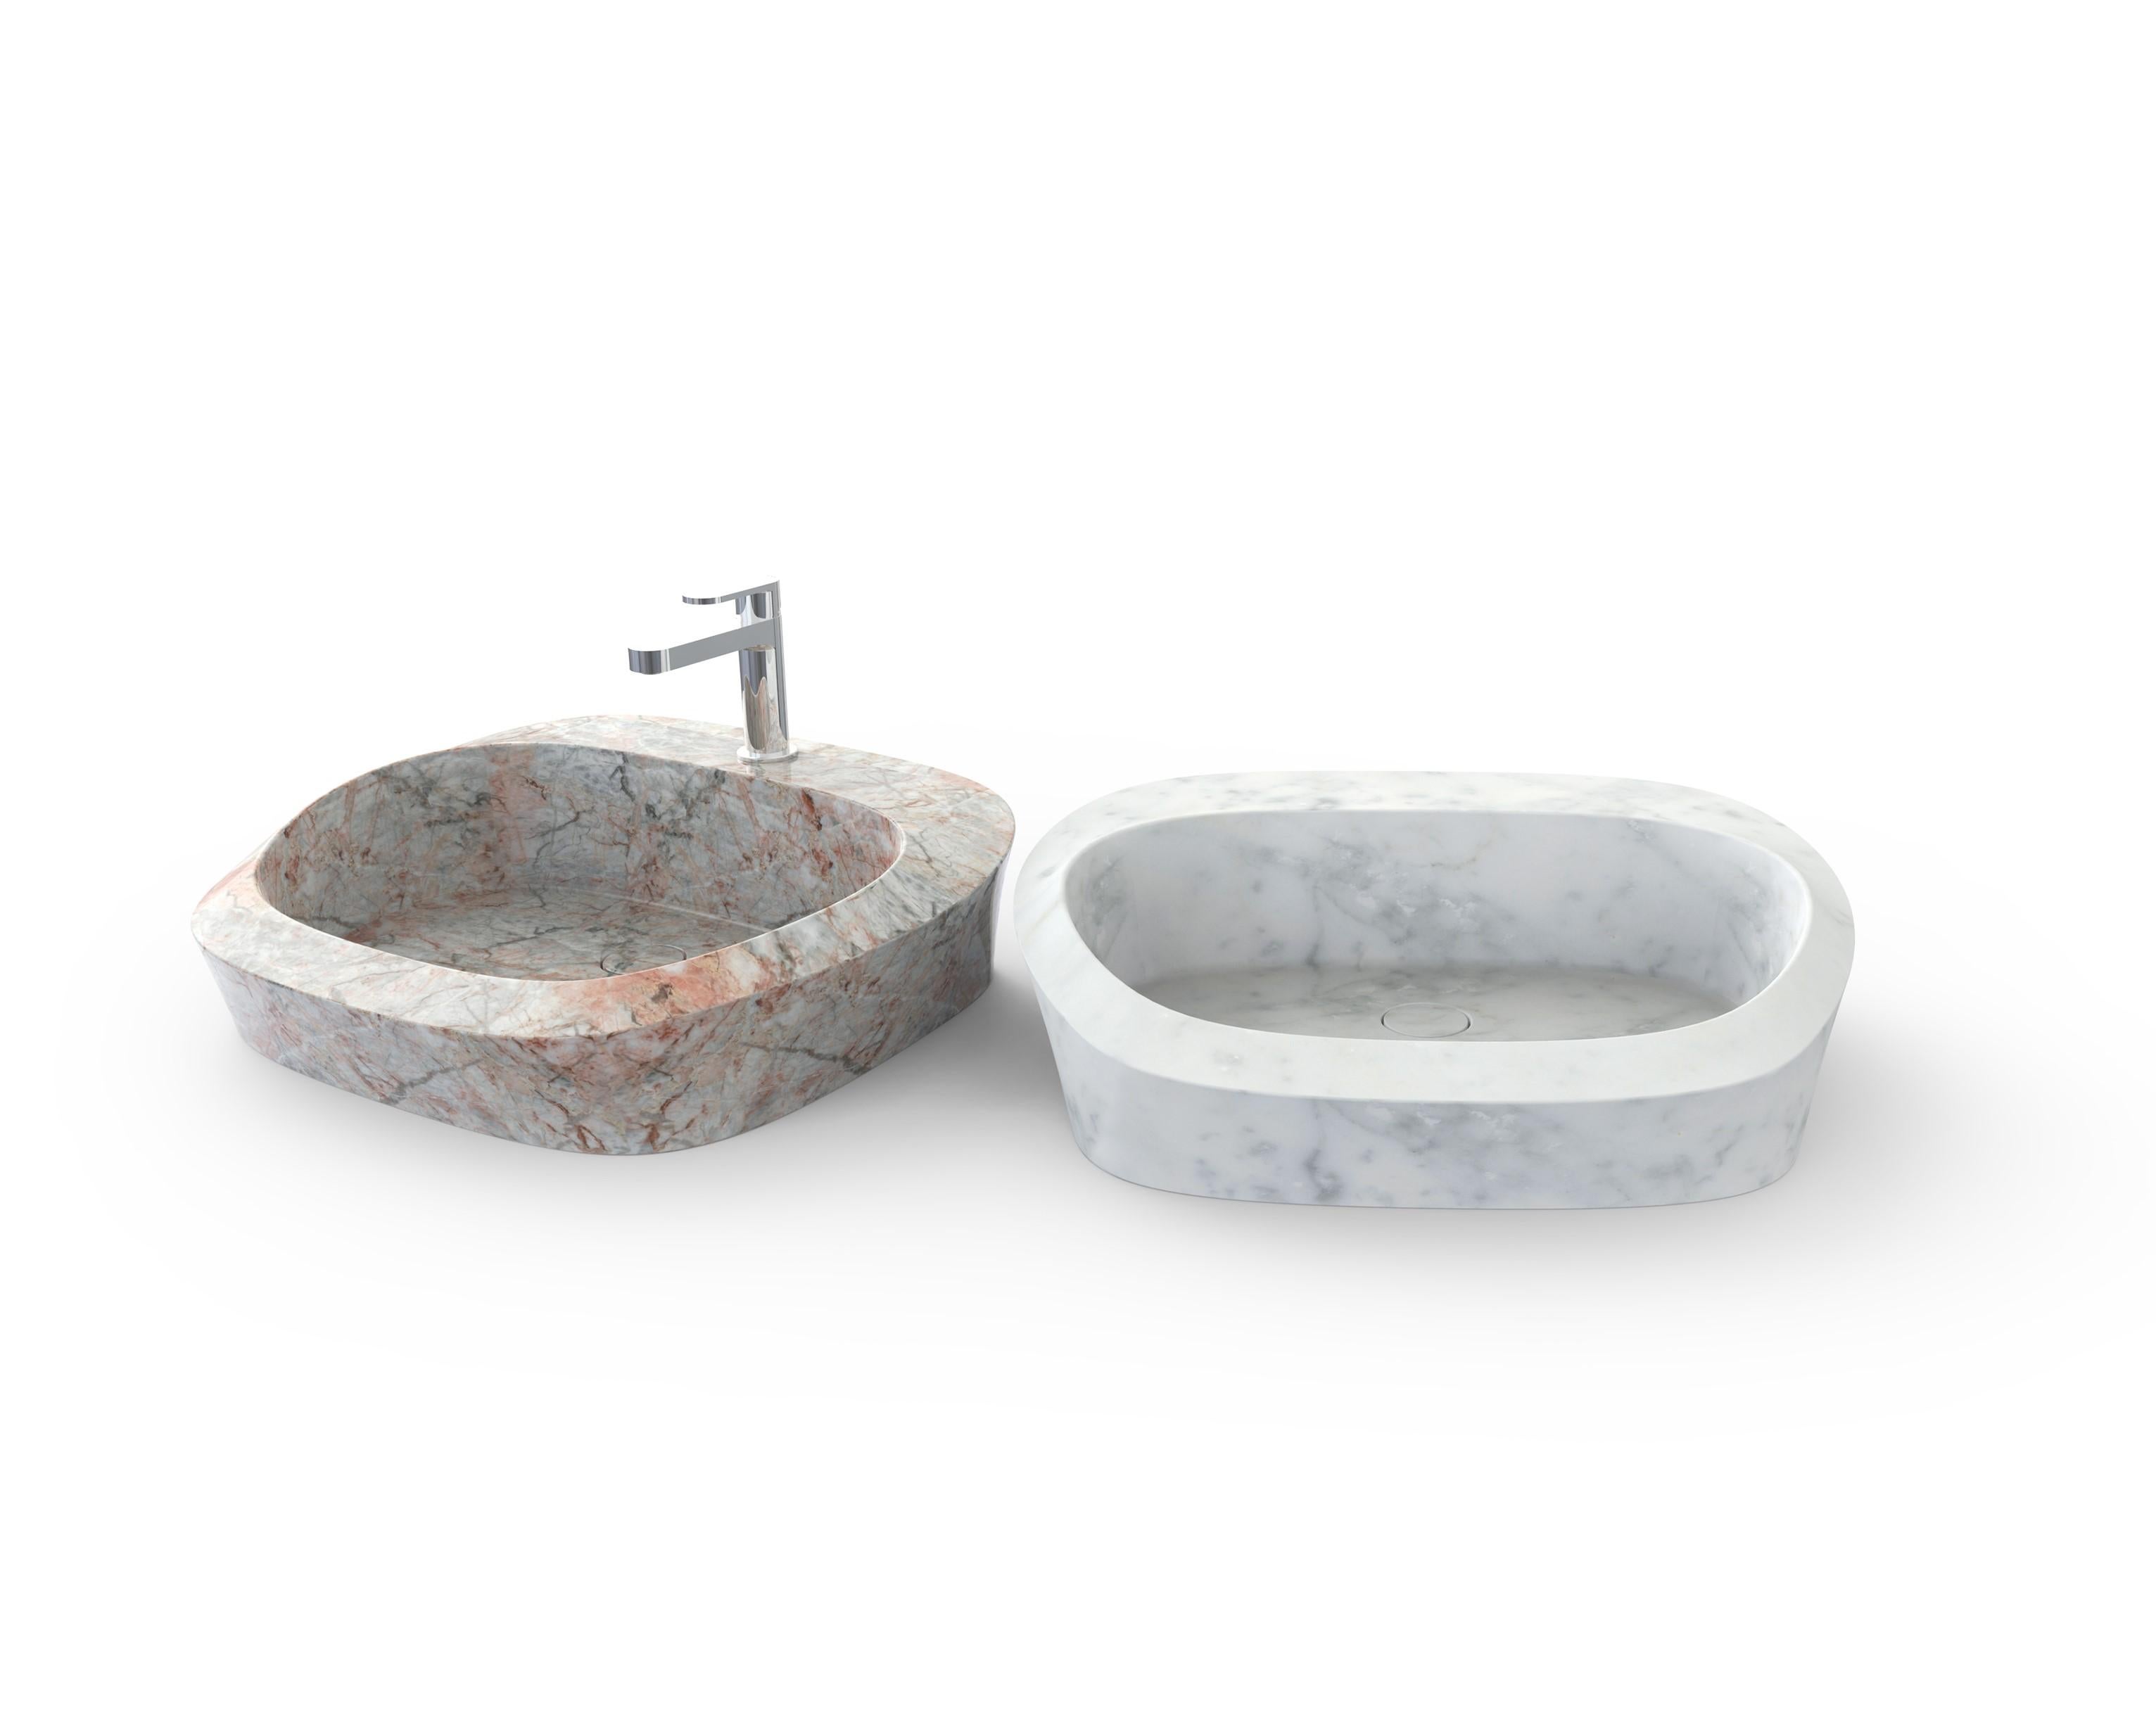 Opera Juliet washbasin by Marmi Serafini
Materials: Fior di Pesco Carnico marble.
Dimensions: D 48 x W 58 x H 17 cm
Available in other marbles.
Tap not included.

One of the most beloved operas set in stone and following the storylines of the most